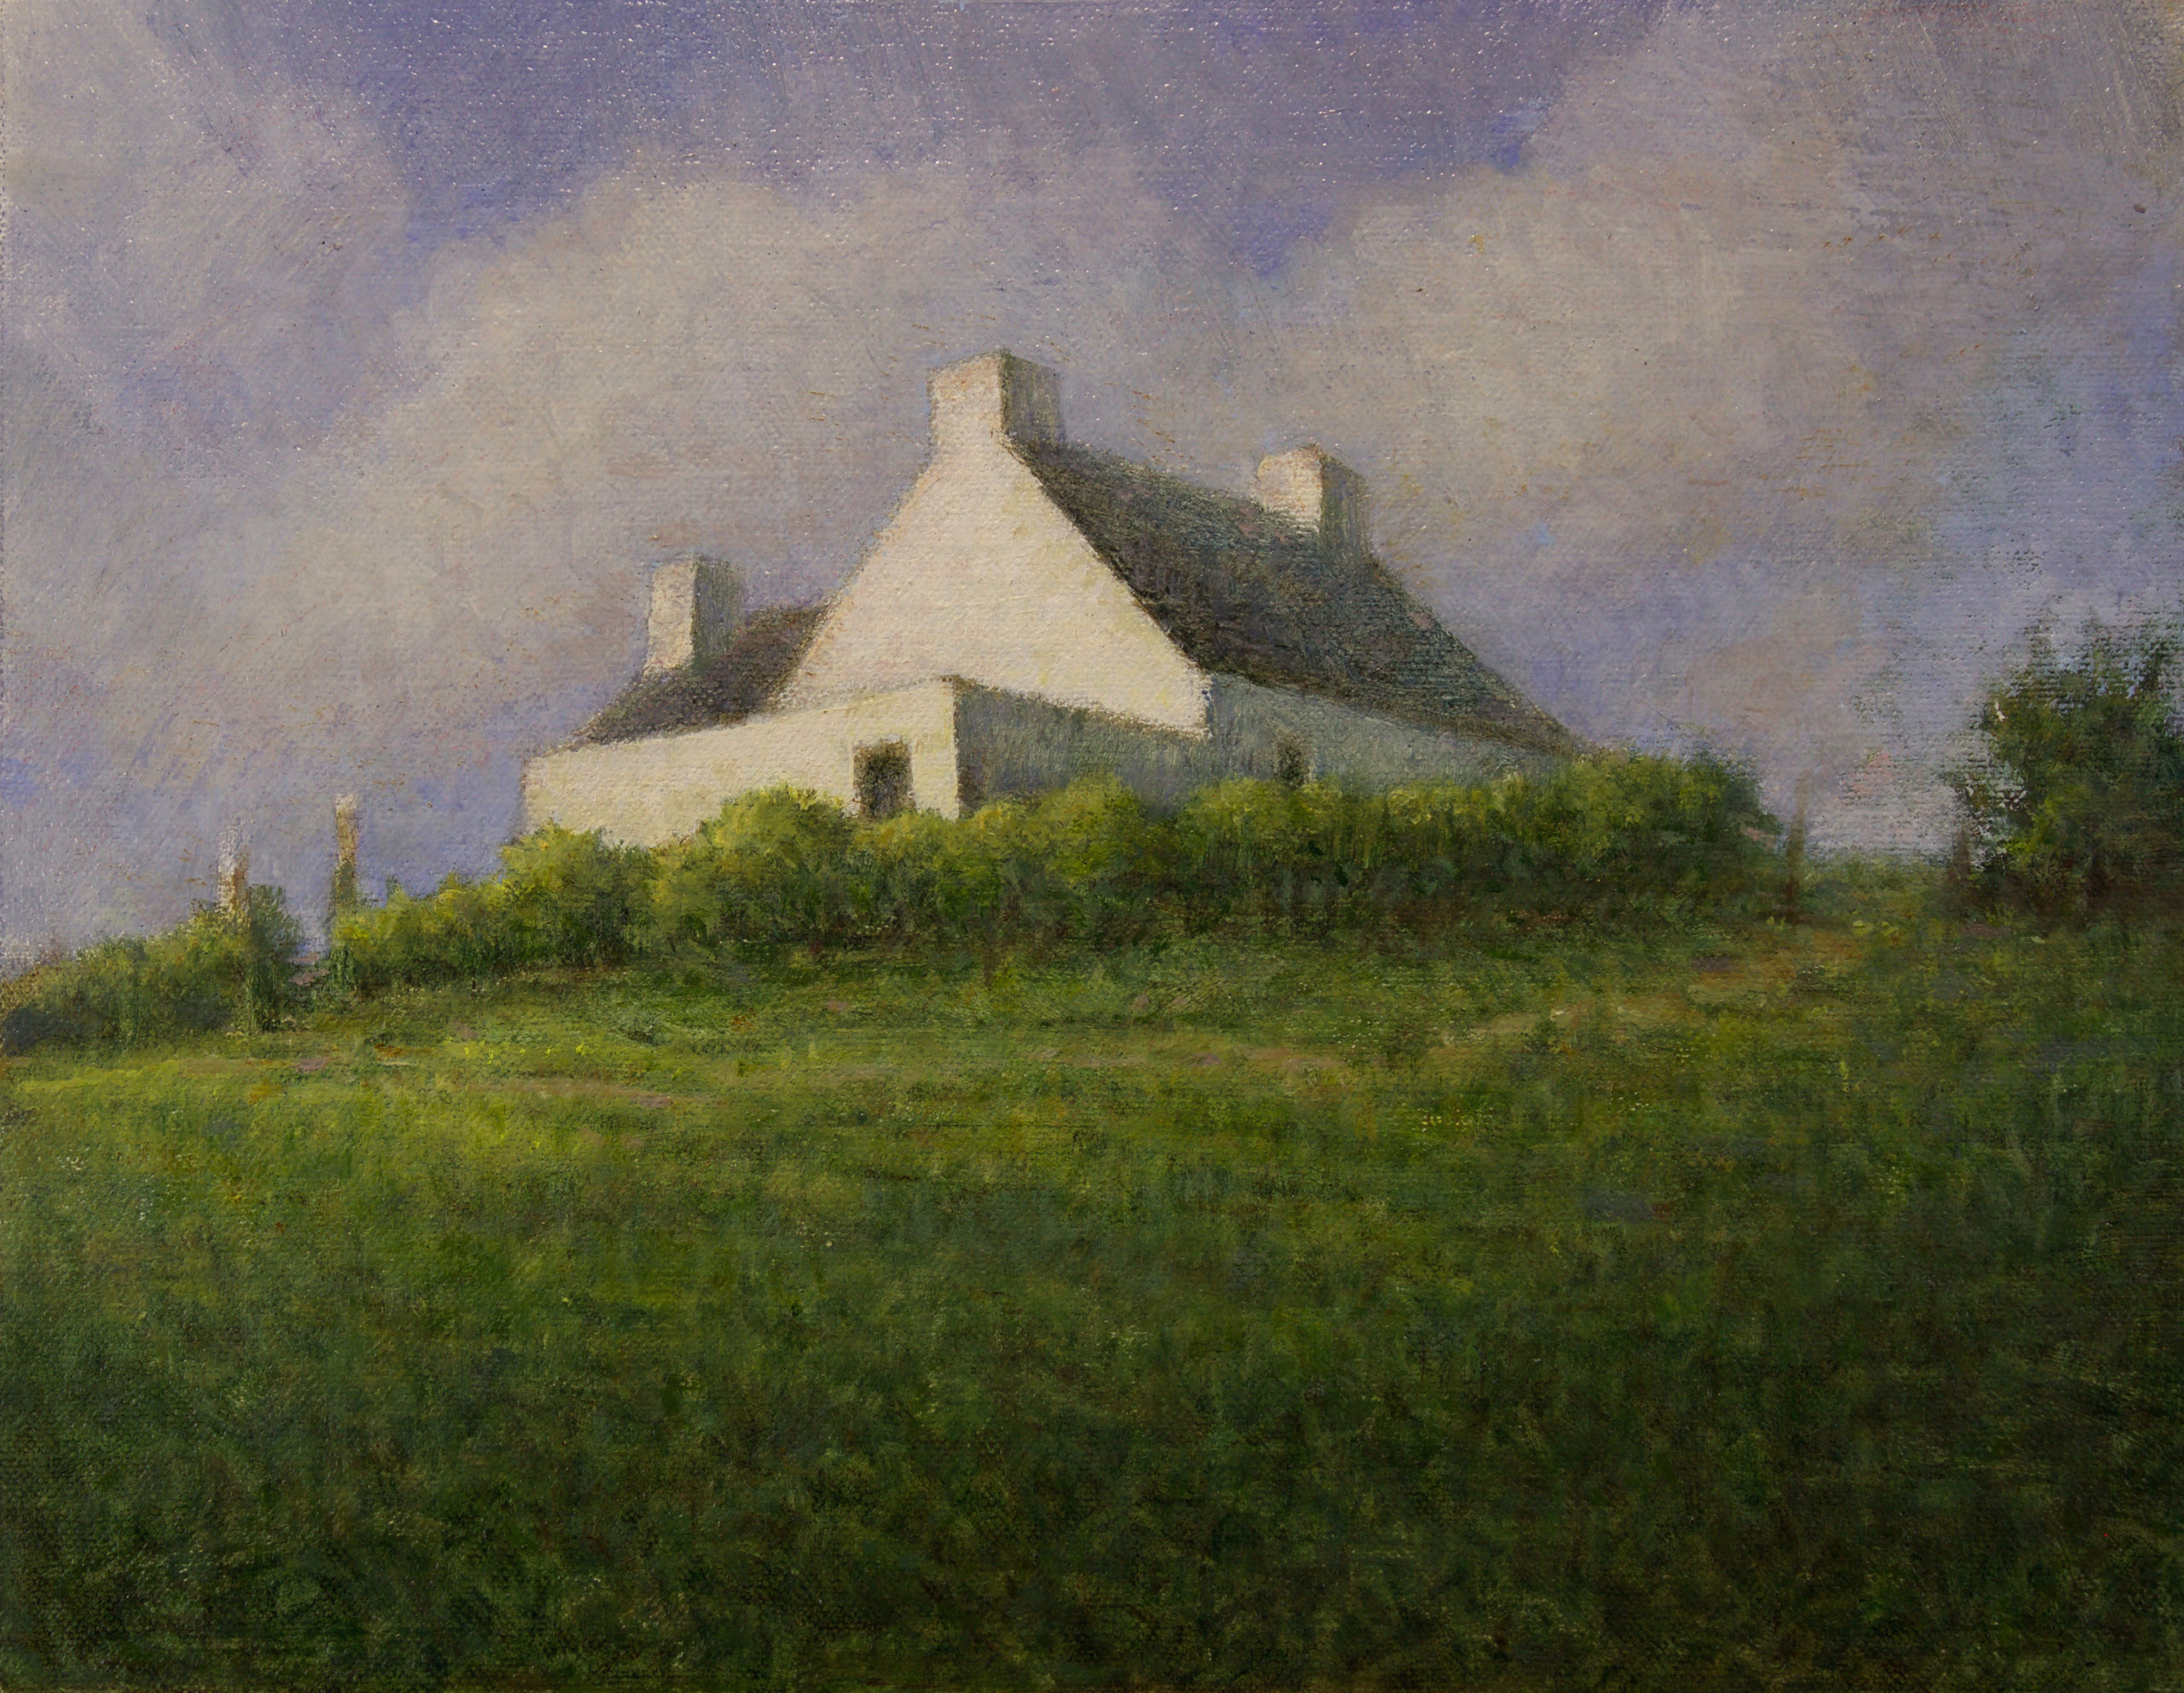 House at the Top of the World by Gerry O’Neill, oil on canvas, 8×10 at Craven Allen Gallery